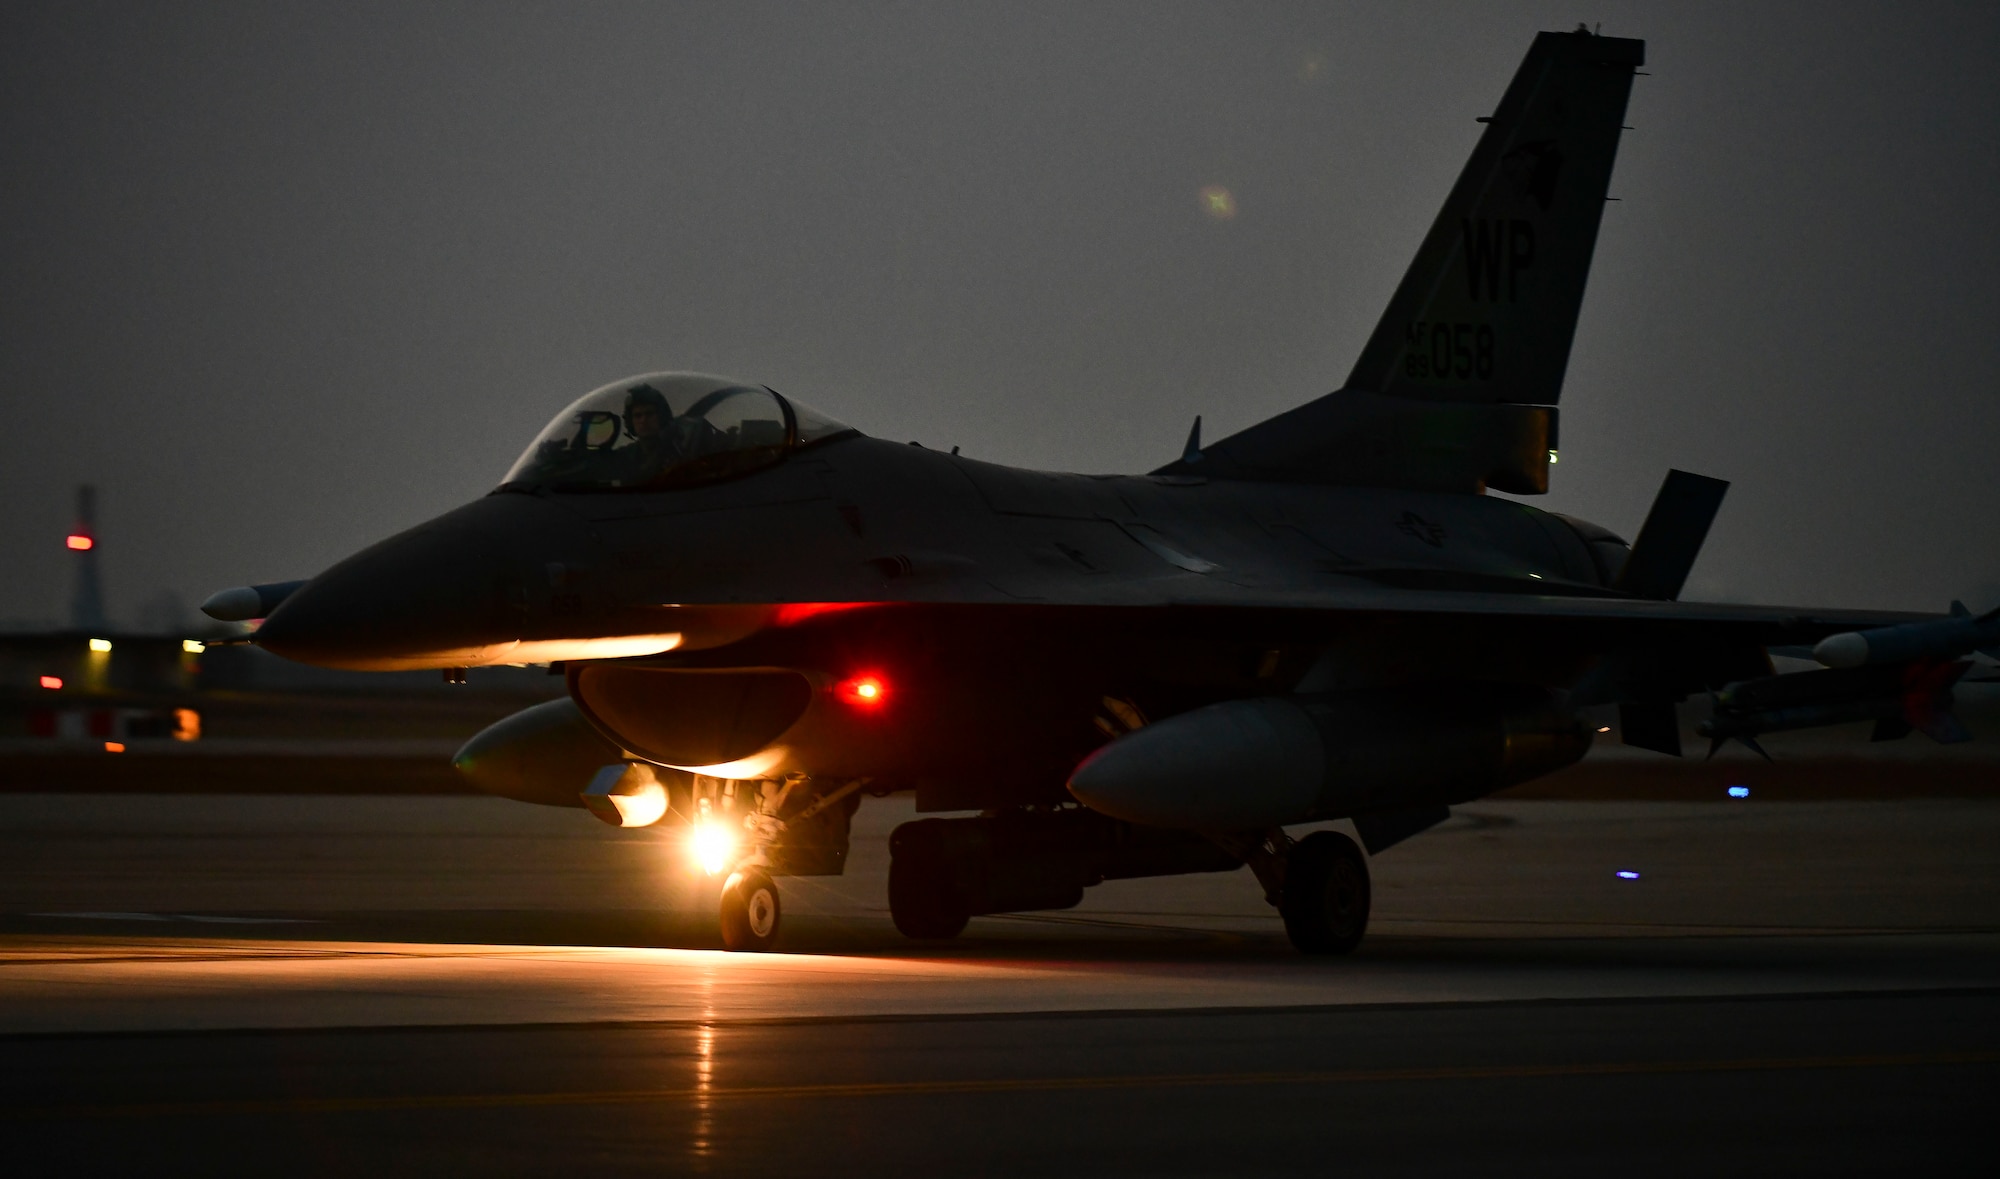 An F-16 Fighting Falcons taxis and prepare for takeoff during routine training at Kunsan Air Base, Republic of Korea, Nov. 3, 2021. The F-16 is a compact, multi-role fighter aircraft, capable of highly maneuverable air-to-air combat and air-to-surface attack. (U.S. Air Force photo by Staff Sgt. Jesenia Landaverde)